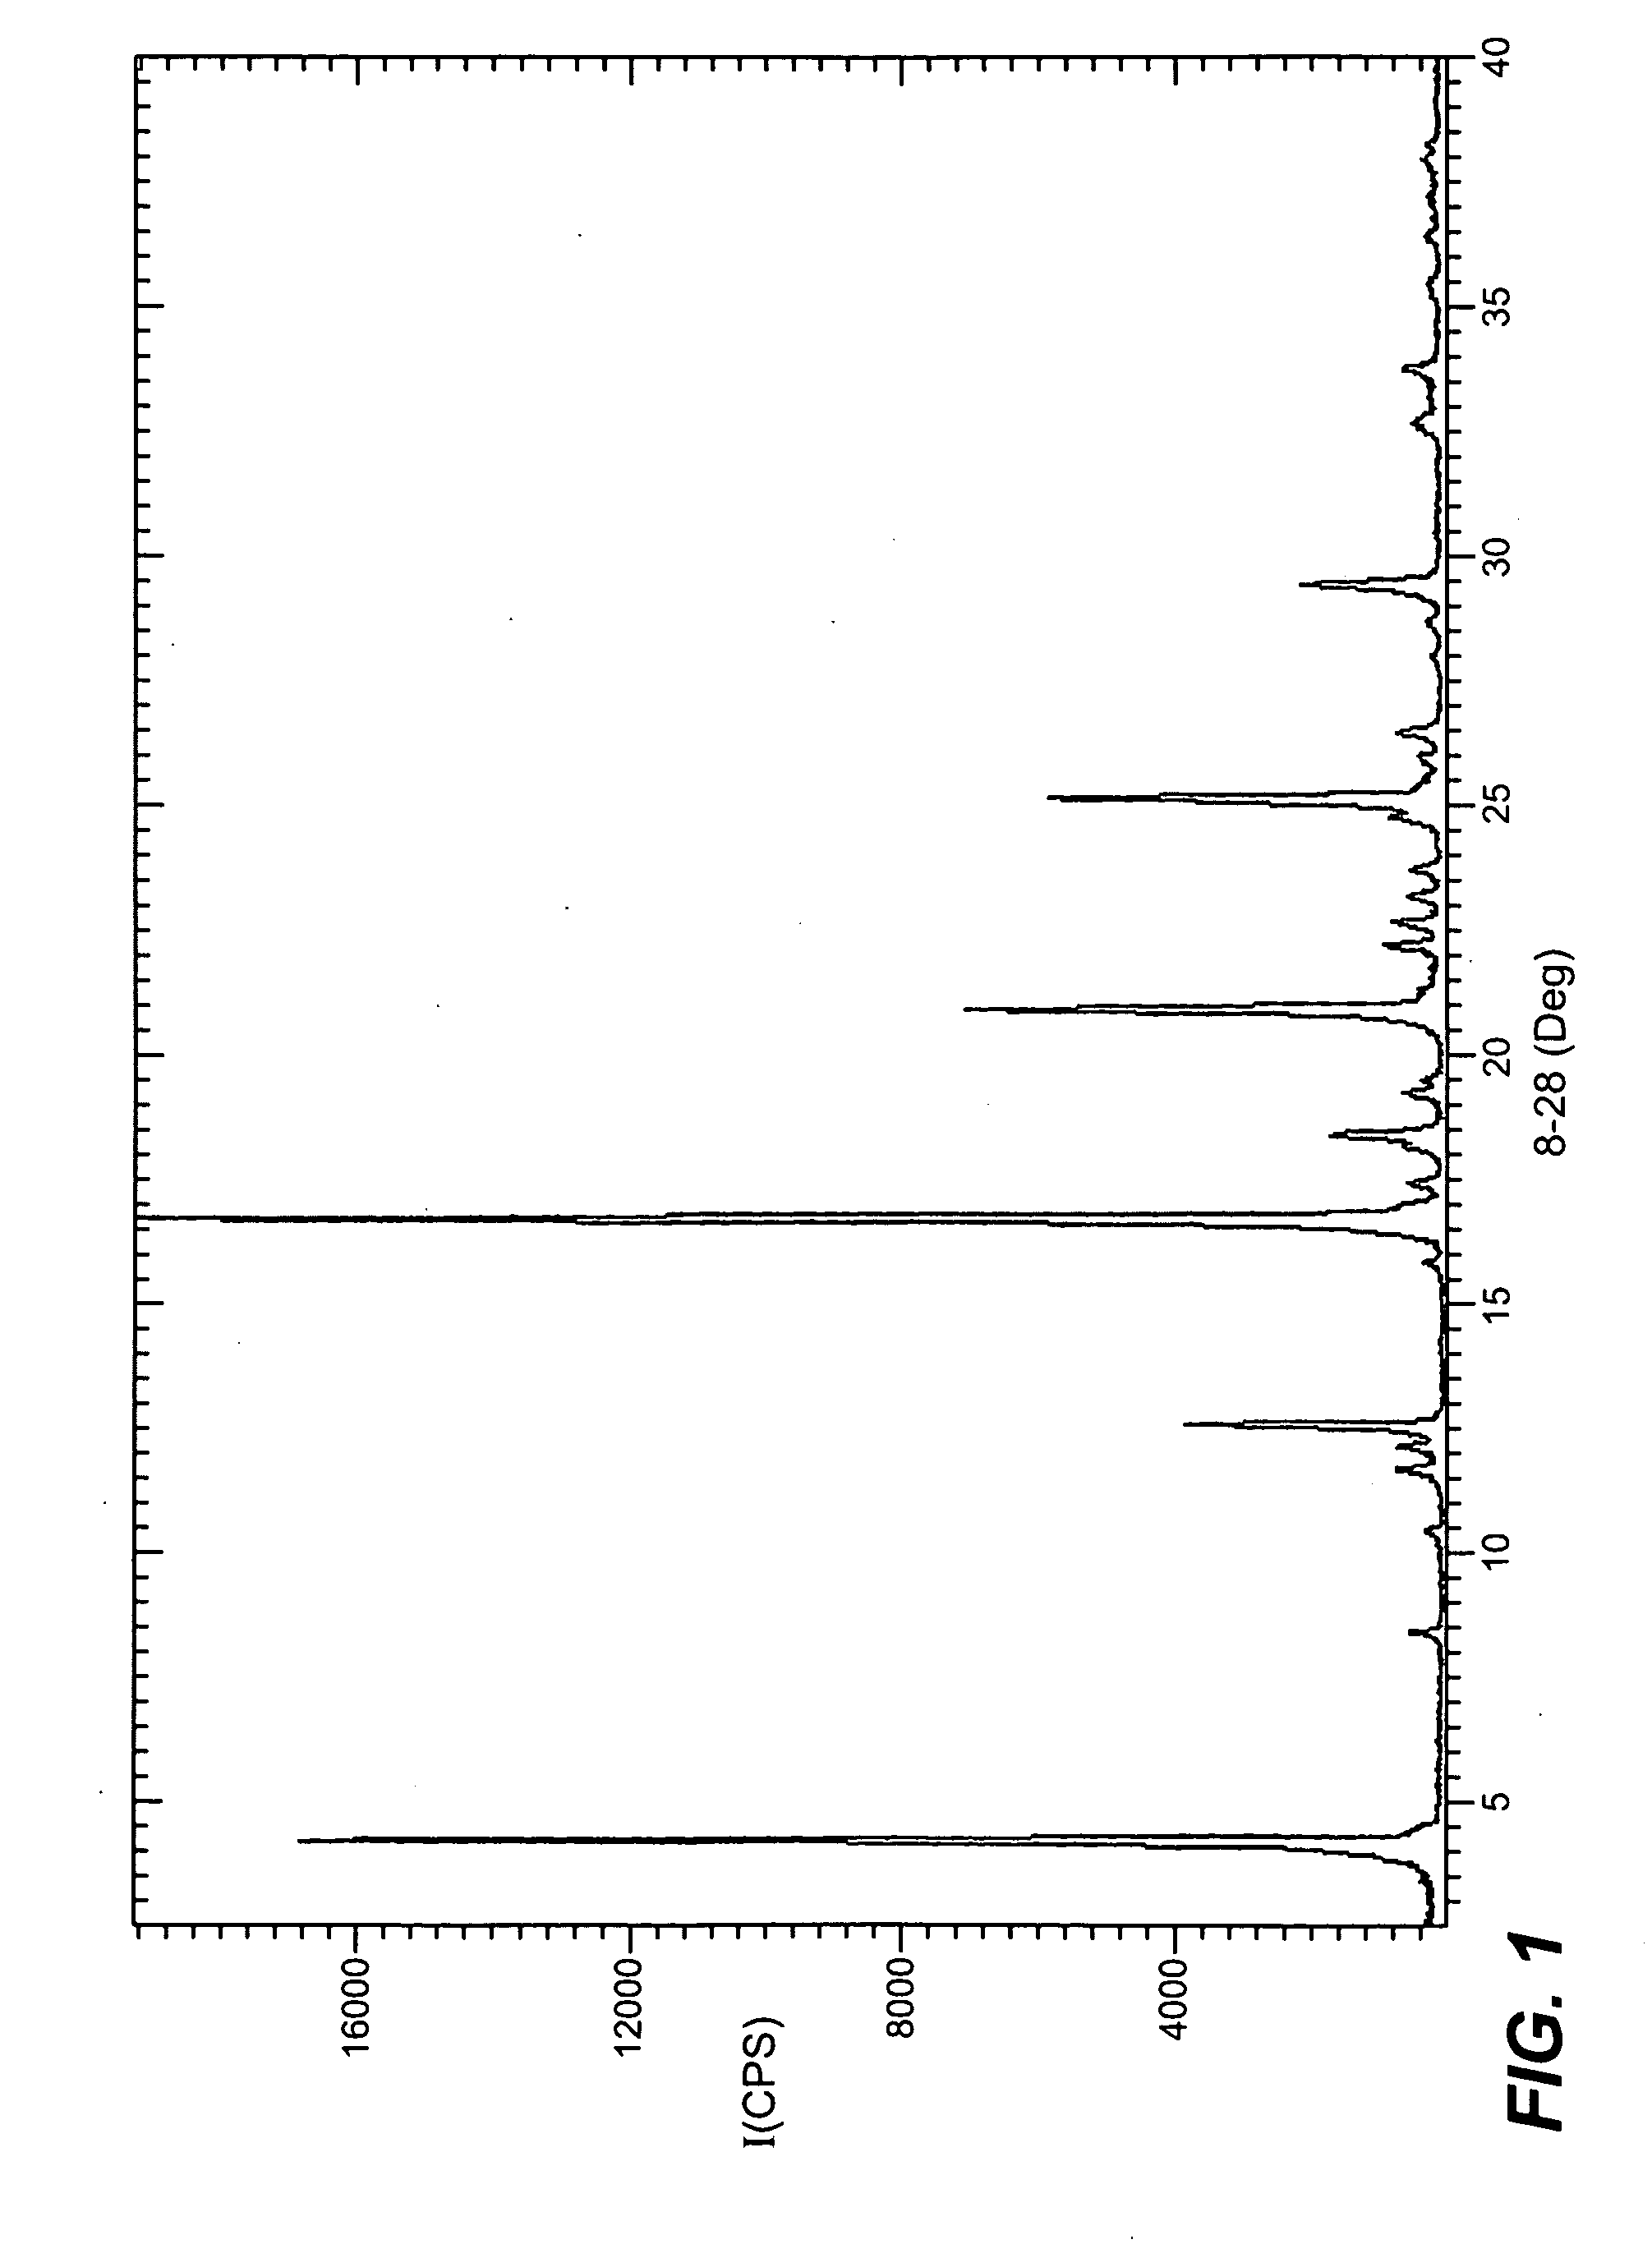 Amino acid derived prodrugs of propofol, compositions, uses and crystalline forms thereof